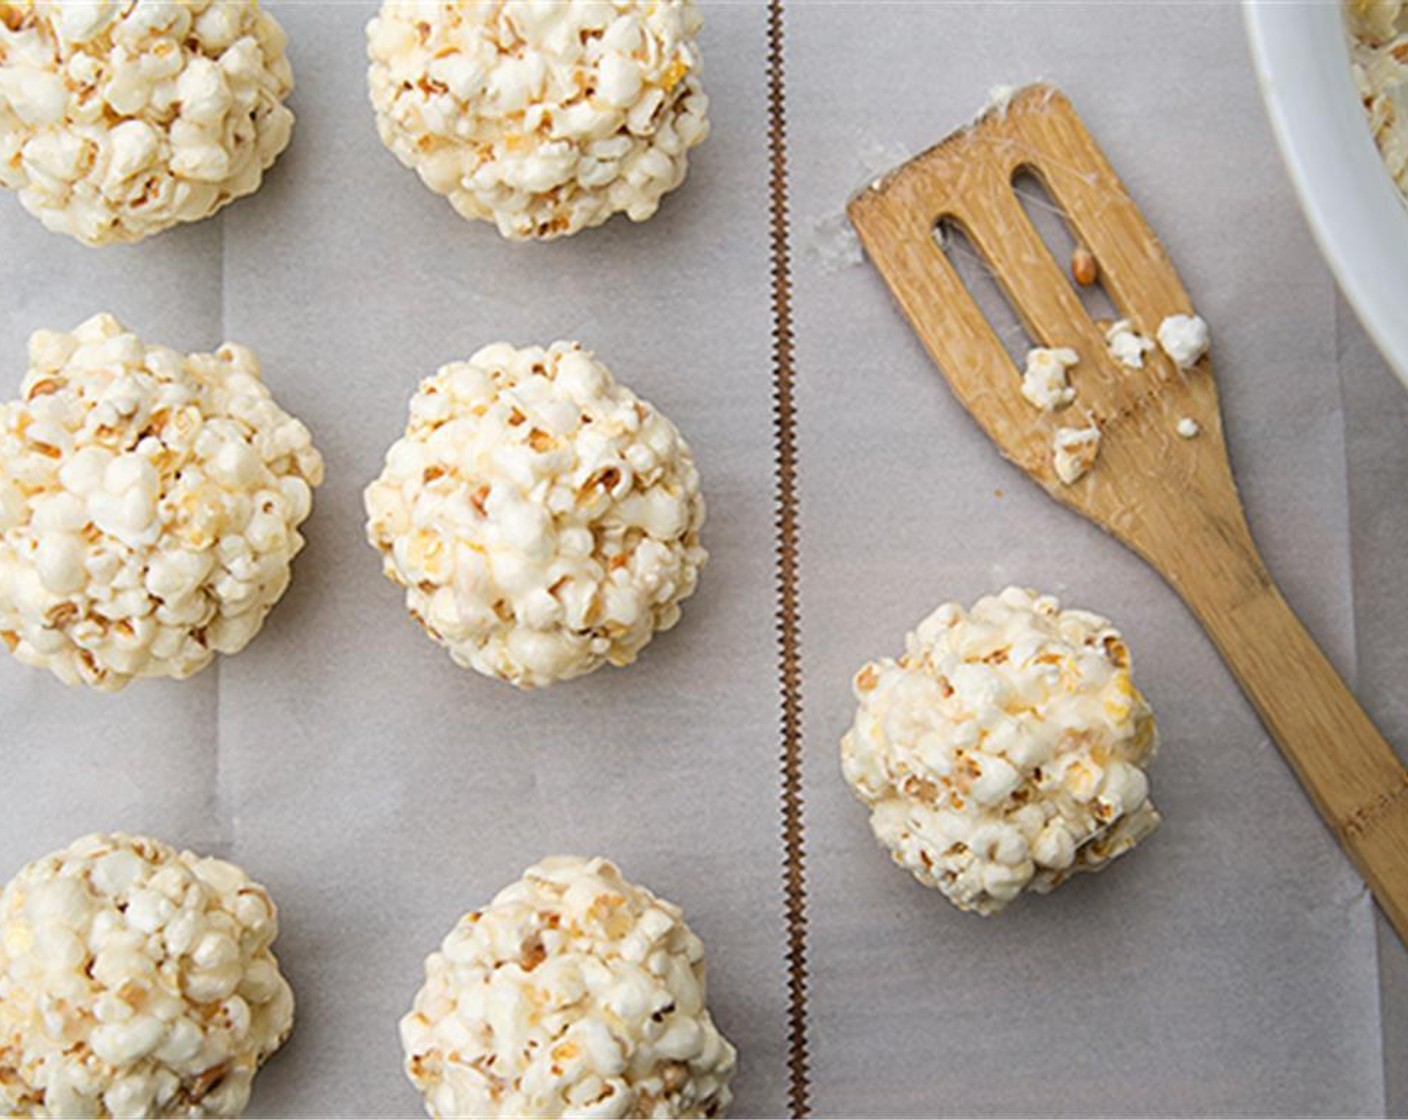 step 4 Grease hands with butter and quickly shape the coated popcorn into balls before it cools.